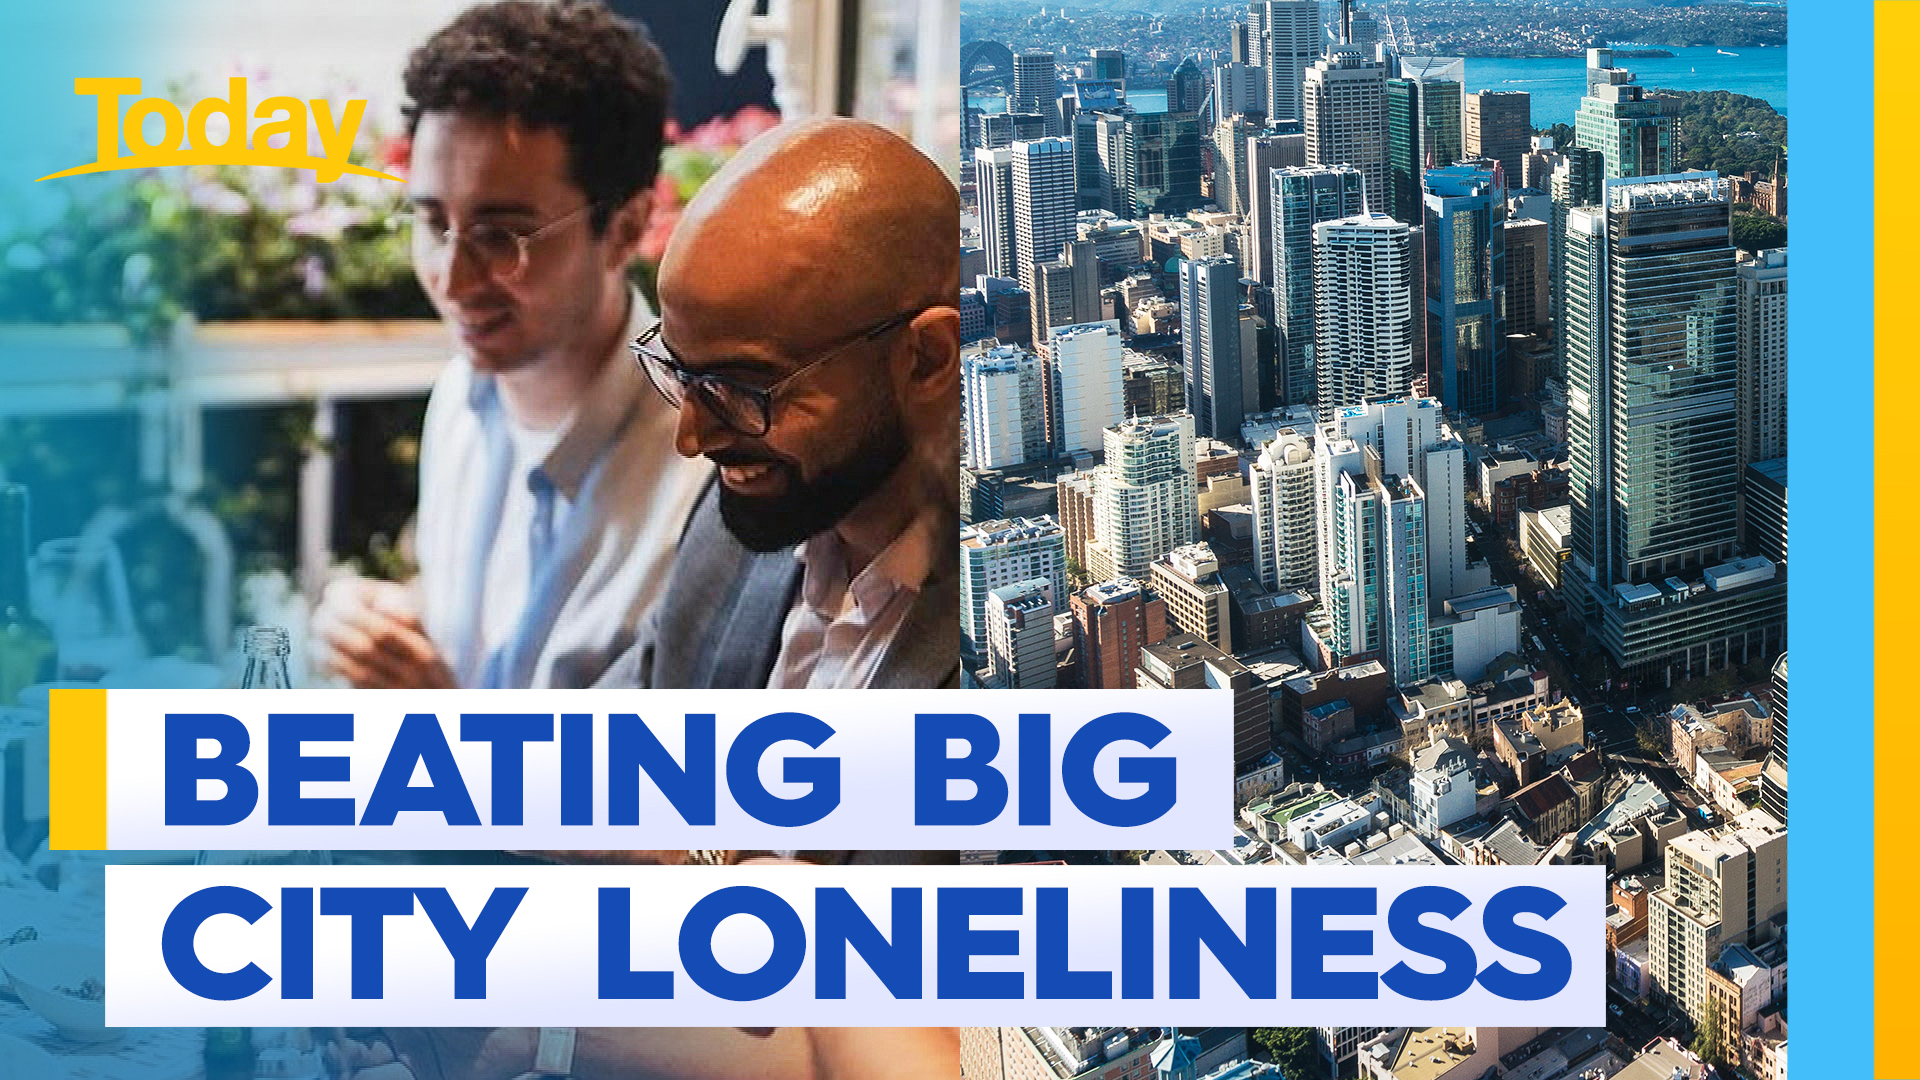 How Aussies can beat big city loneliness